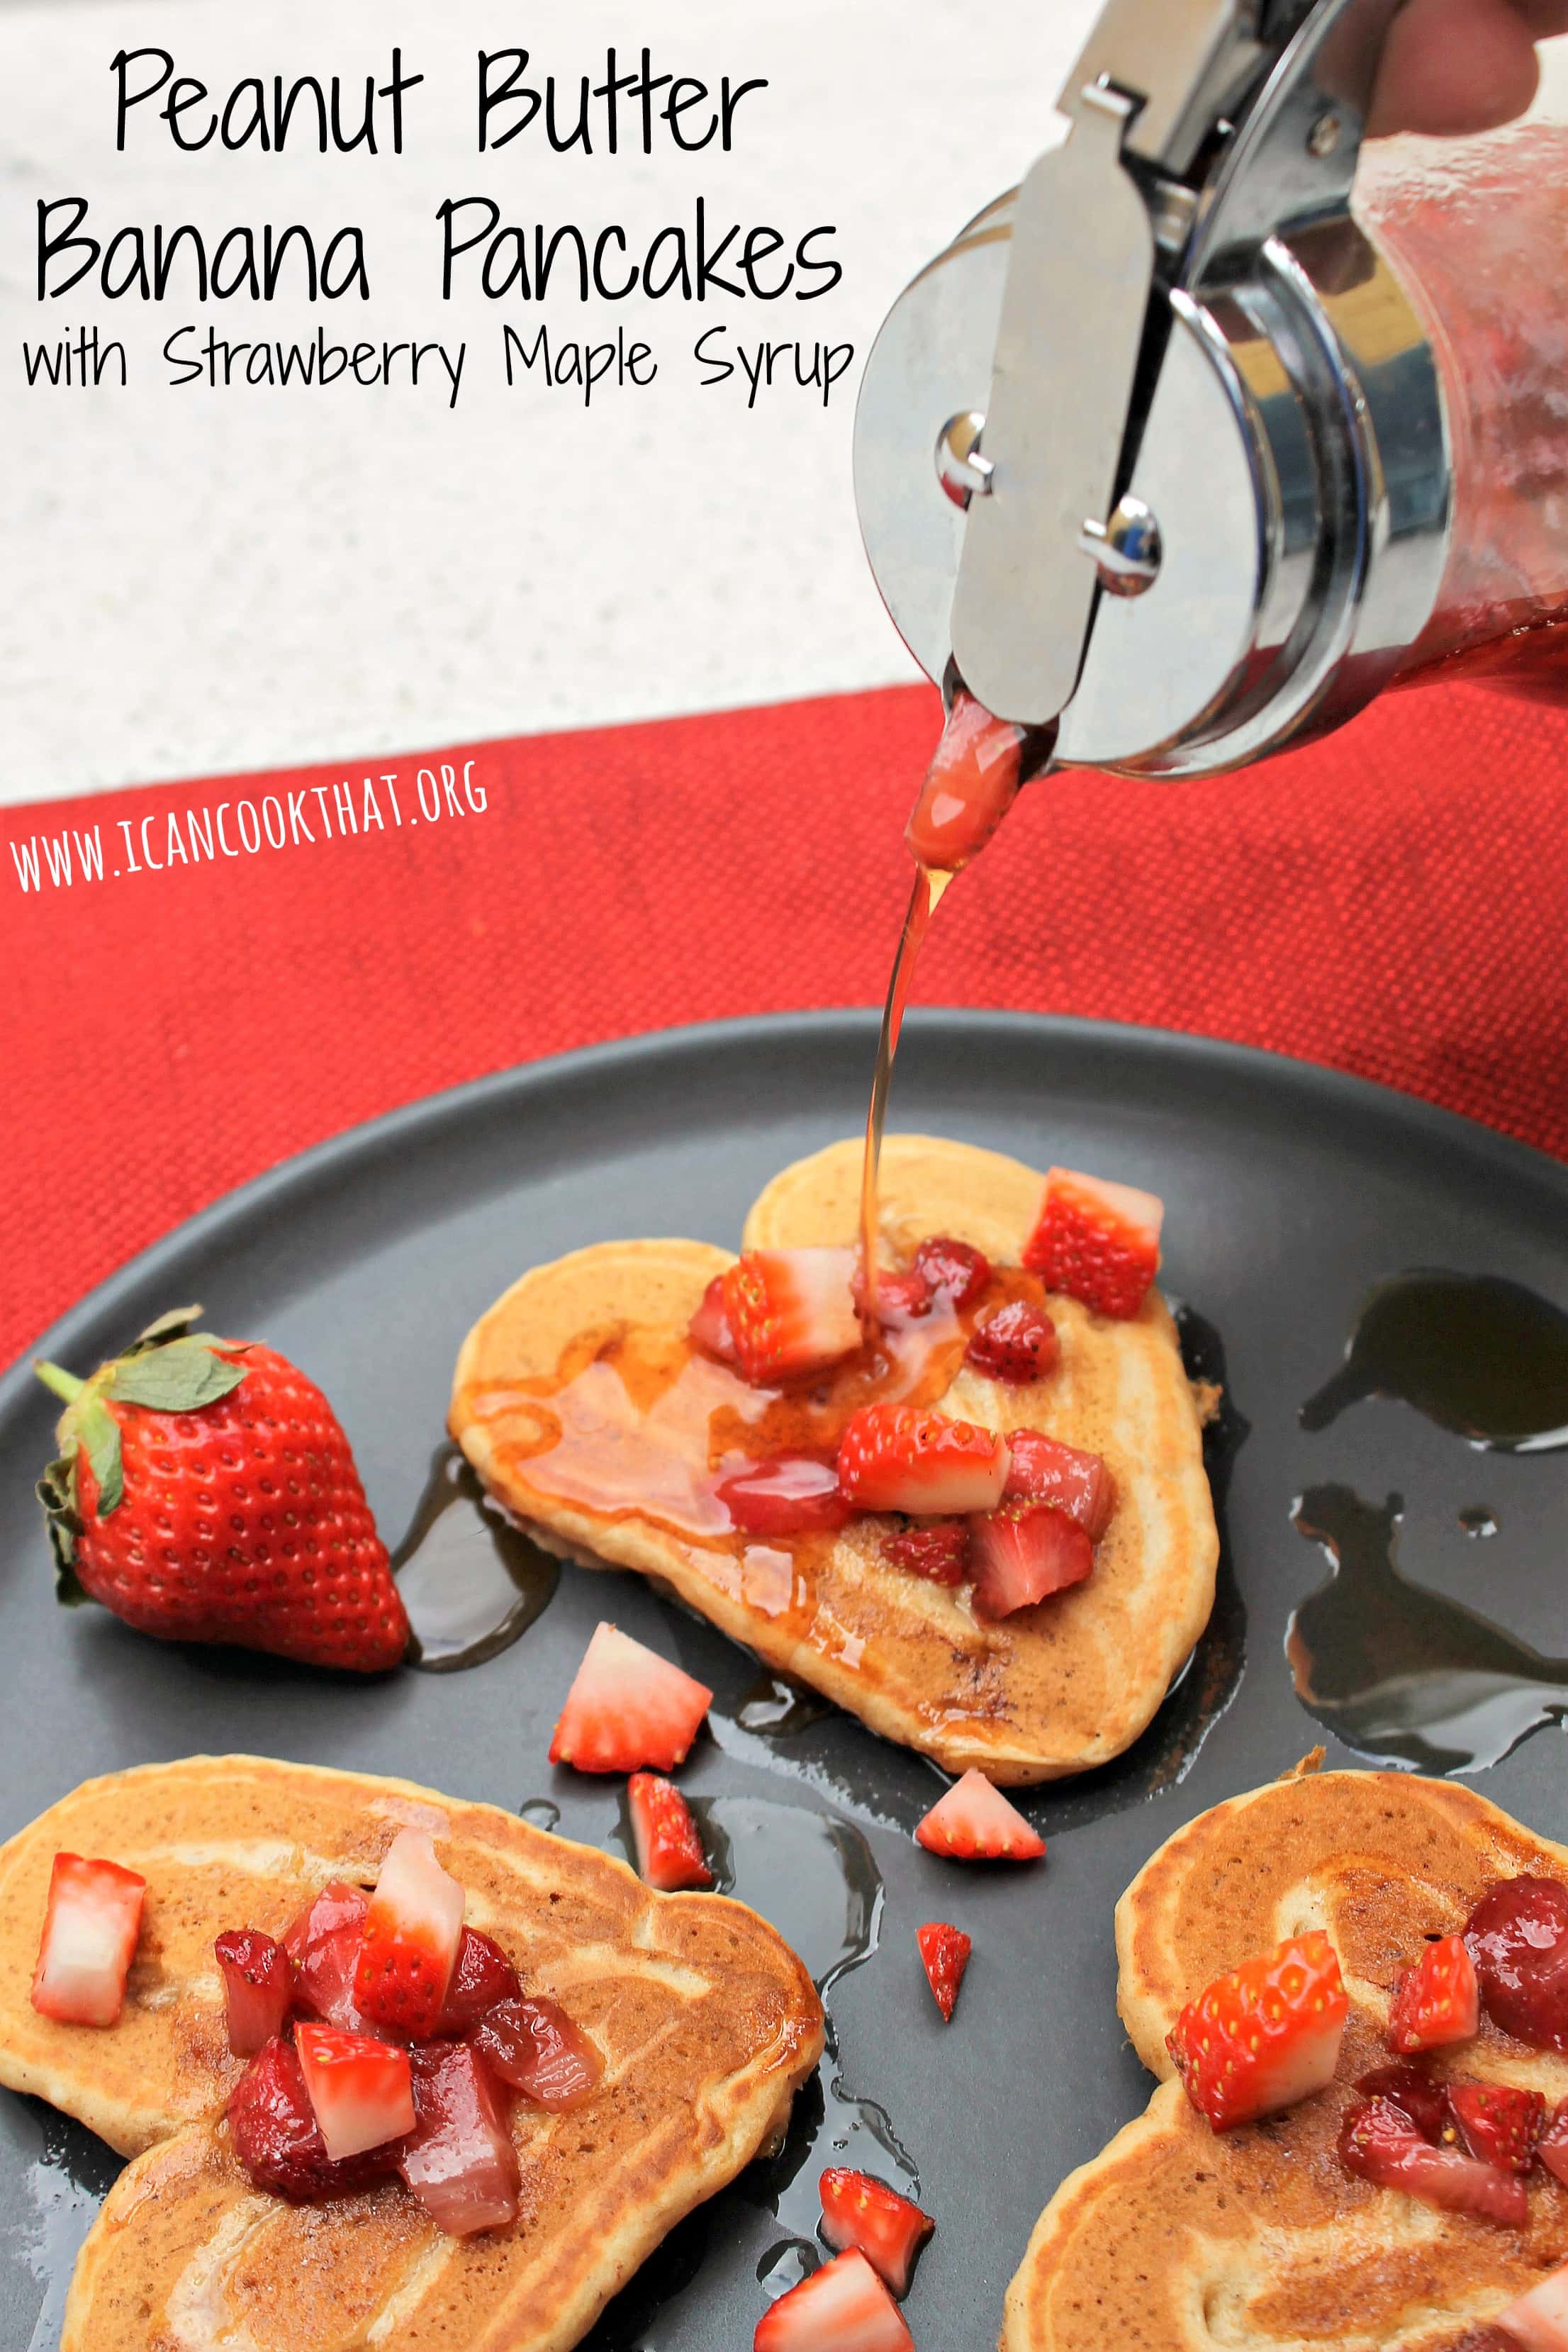 Peanut Butter Banana Pancakes with Strawberry Maple Syrup